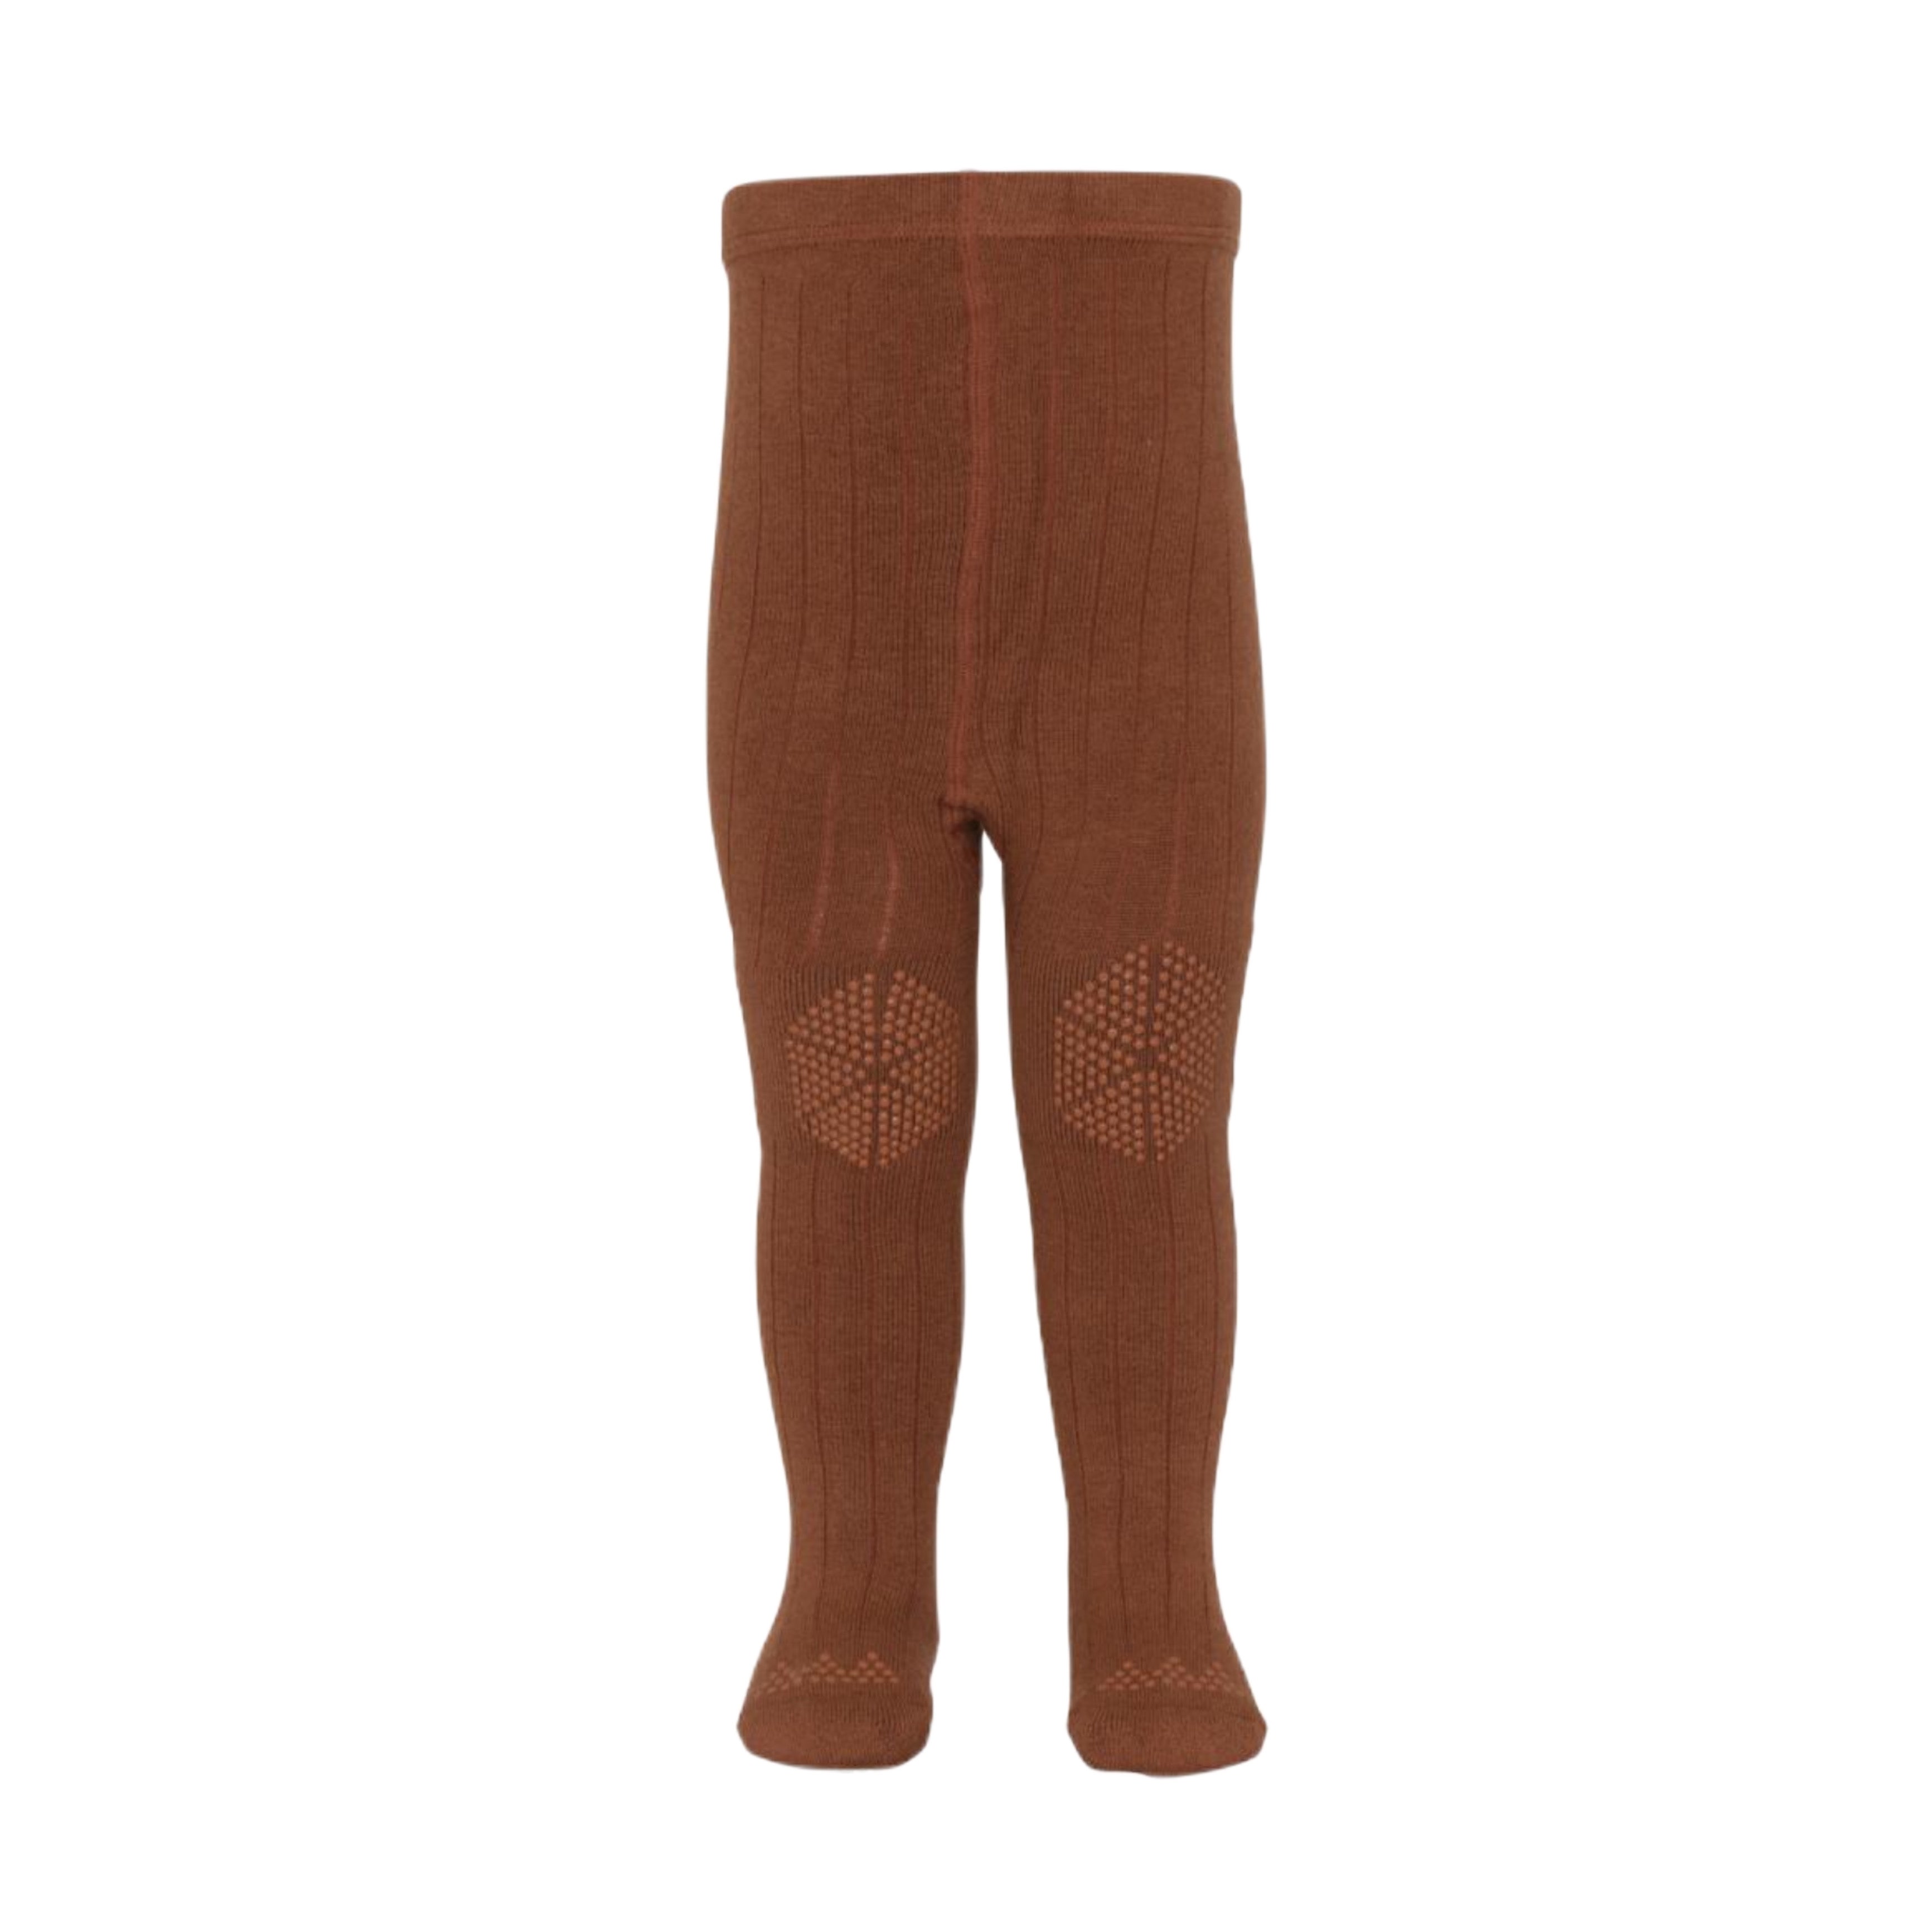 Melton bamboo/wool tights - let's go